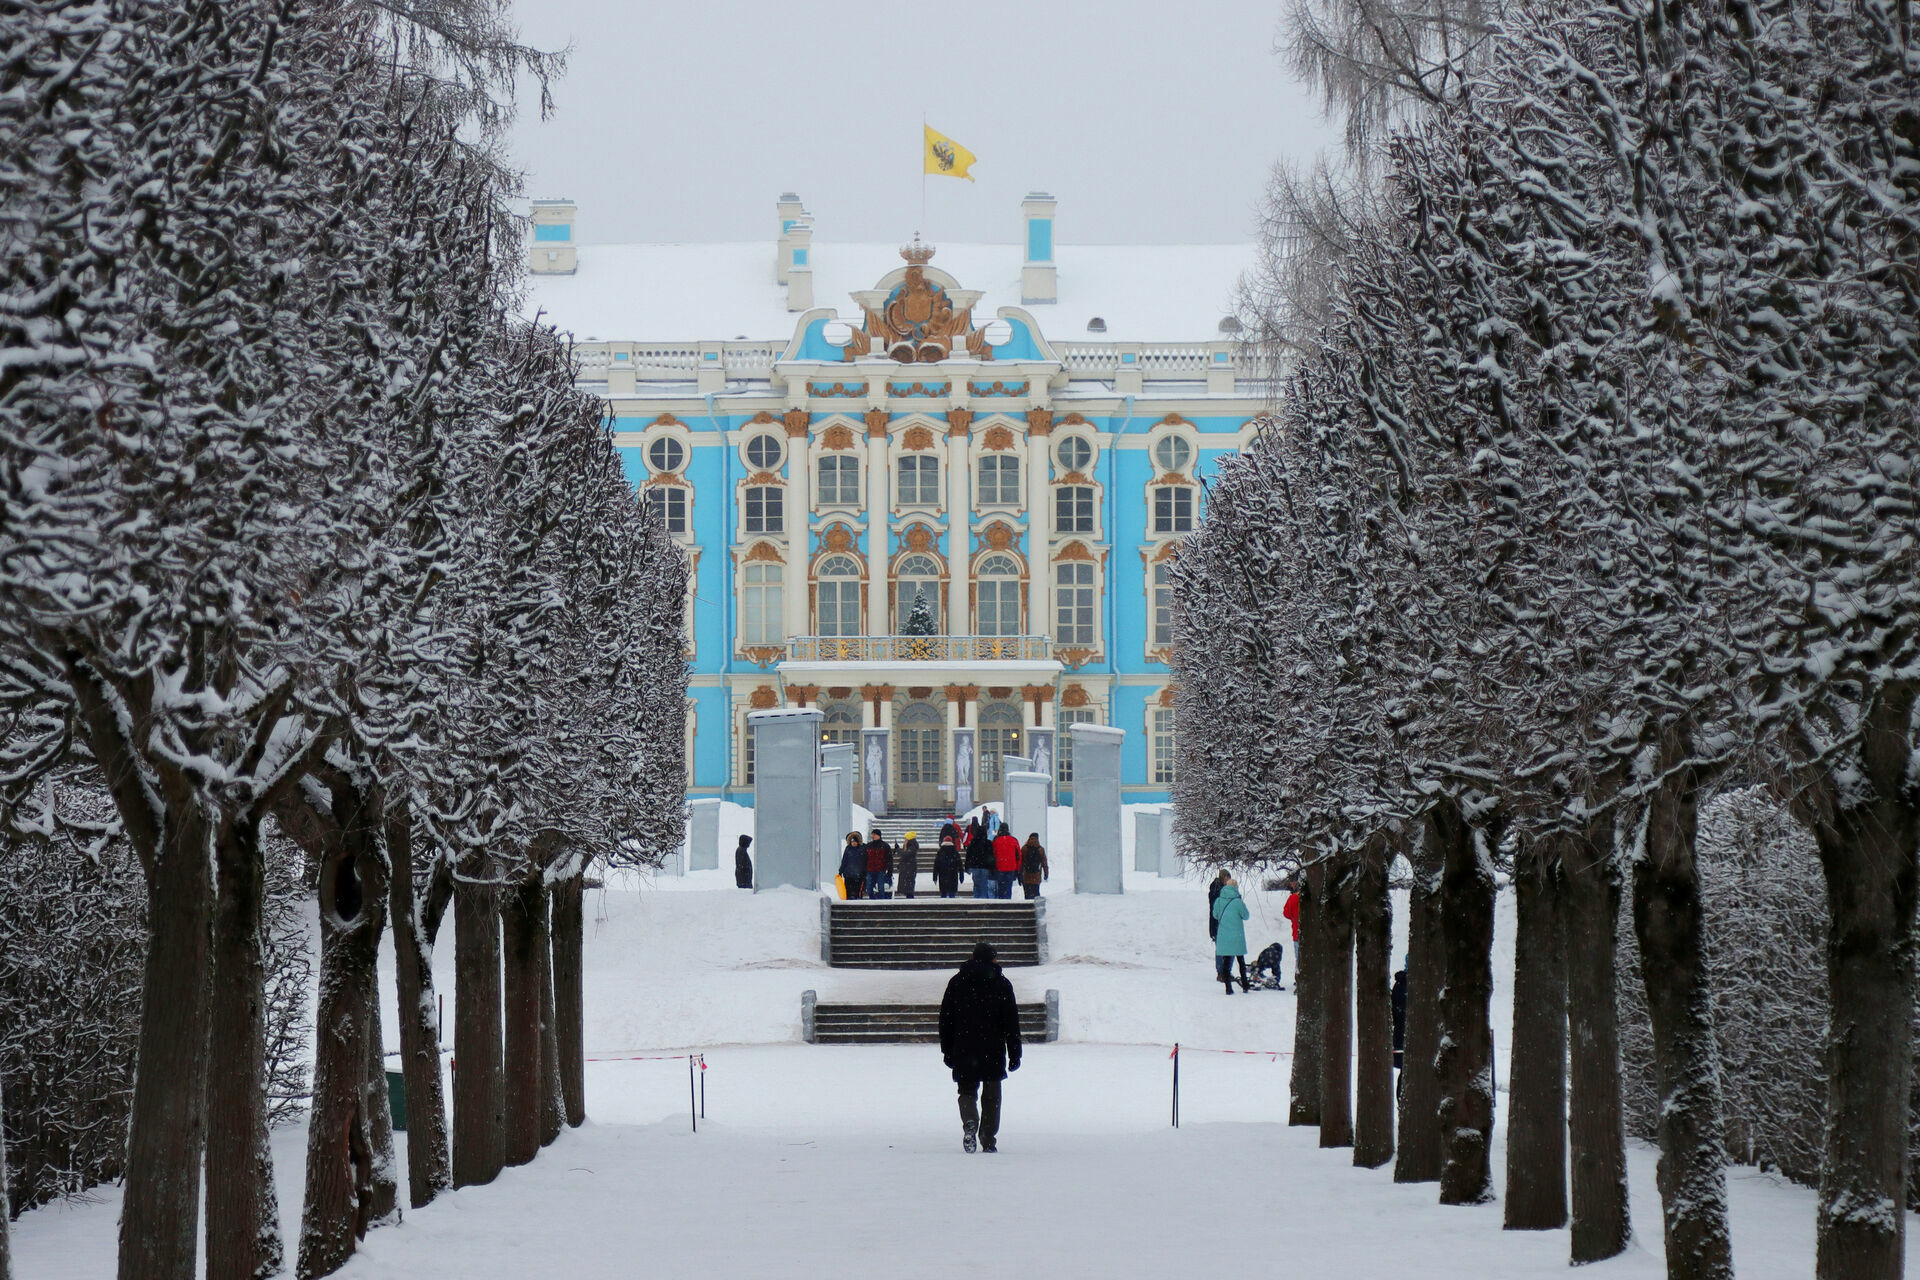 “Snow is exotic for them". Tourist industry of St. Petersburg is waiting for tourists from India and Arabs